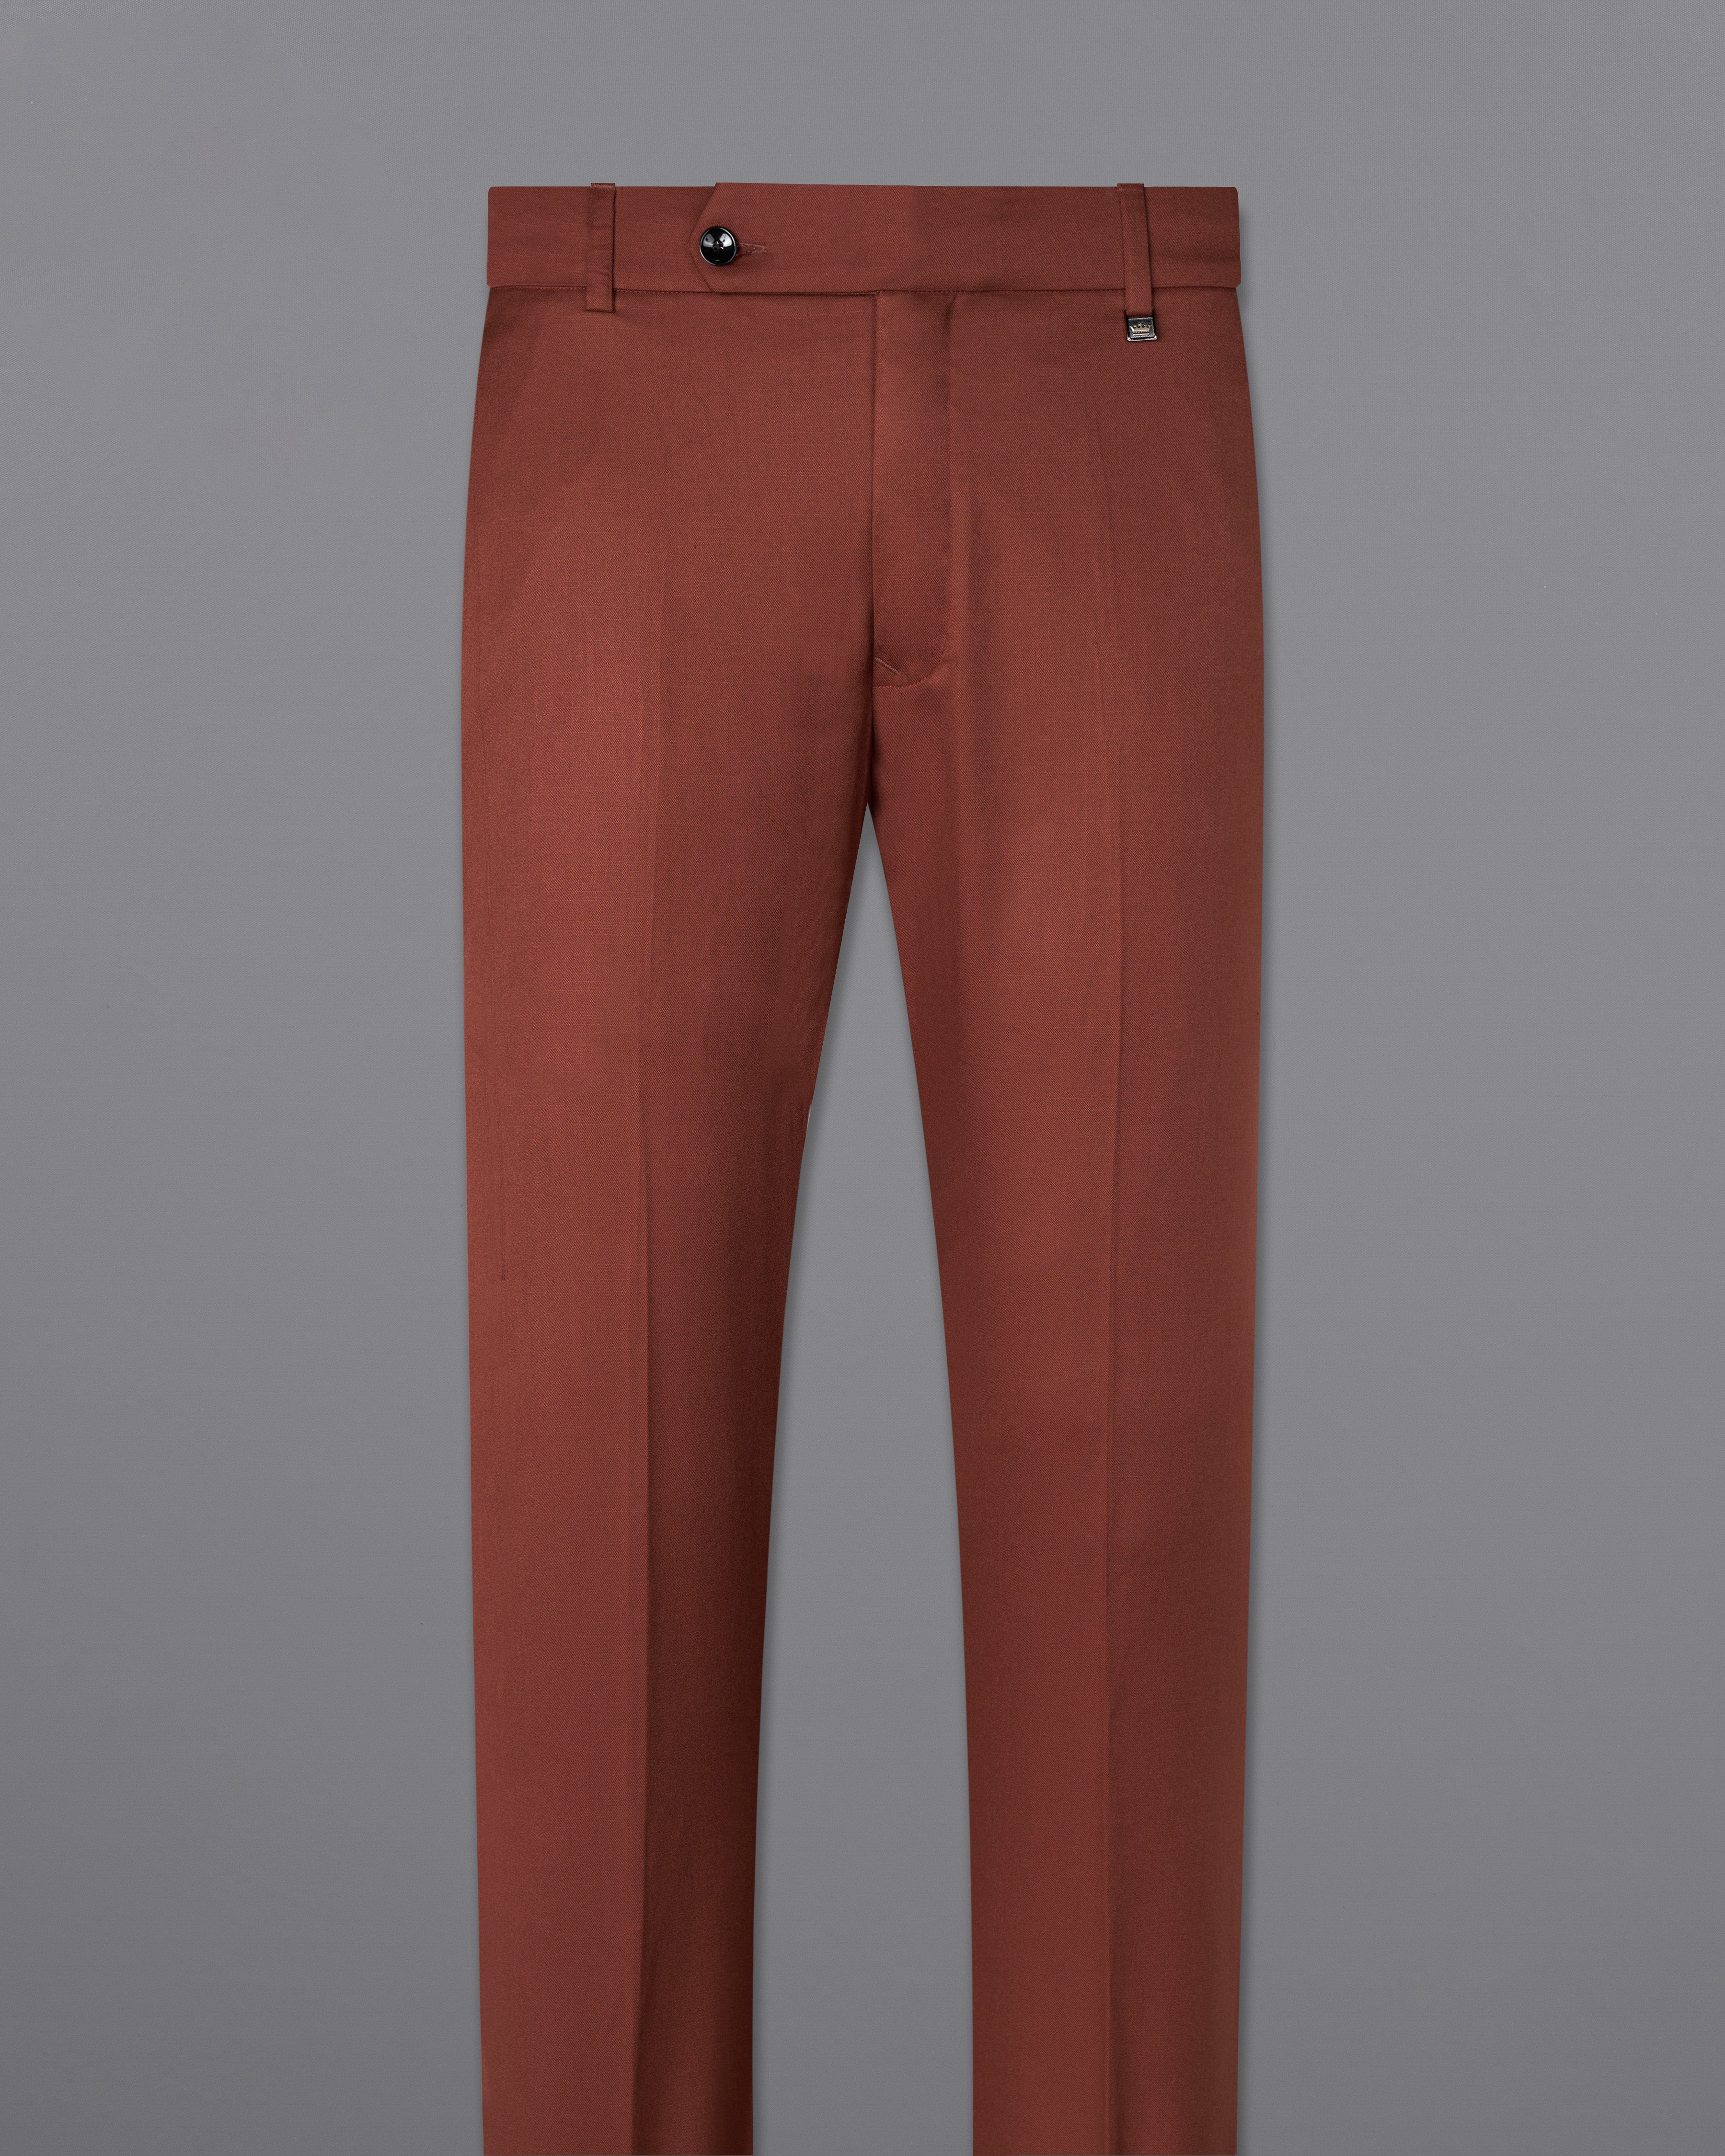 Ironstone Red Stretchable traveler Pant T2697-28, T2697-30, T2697-32, T2697-34, T2697-36, T2697-38, T2697-40, T2697-42, T2697-44